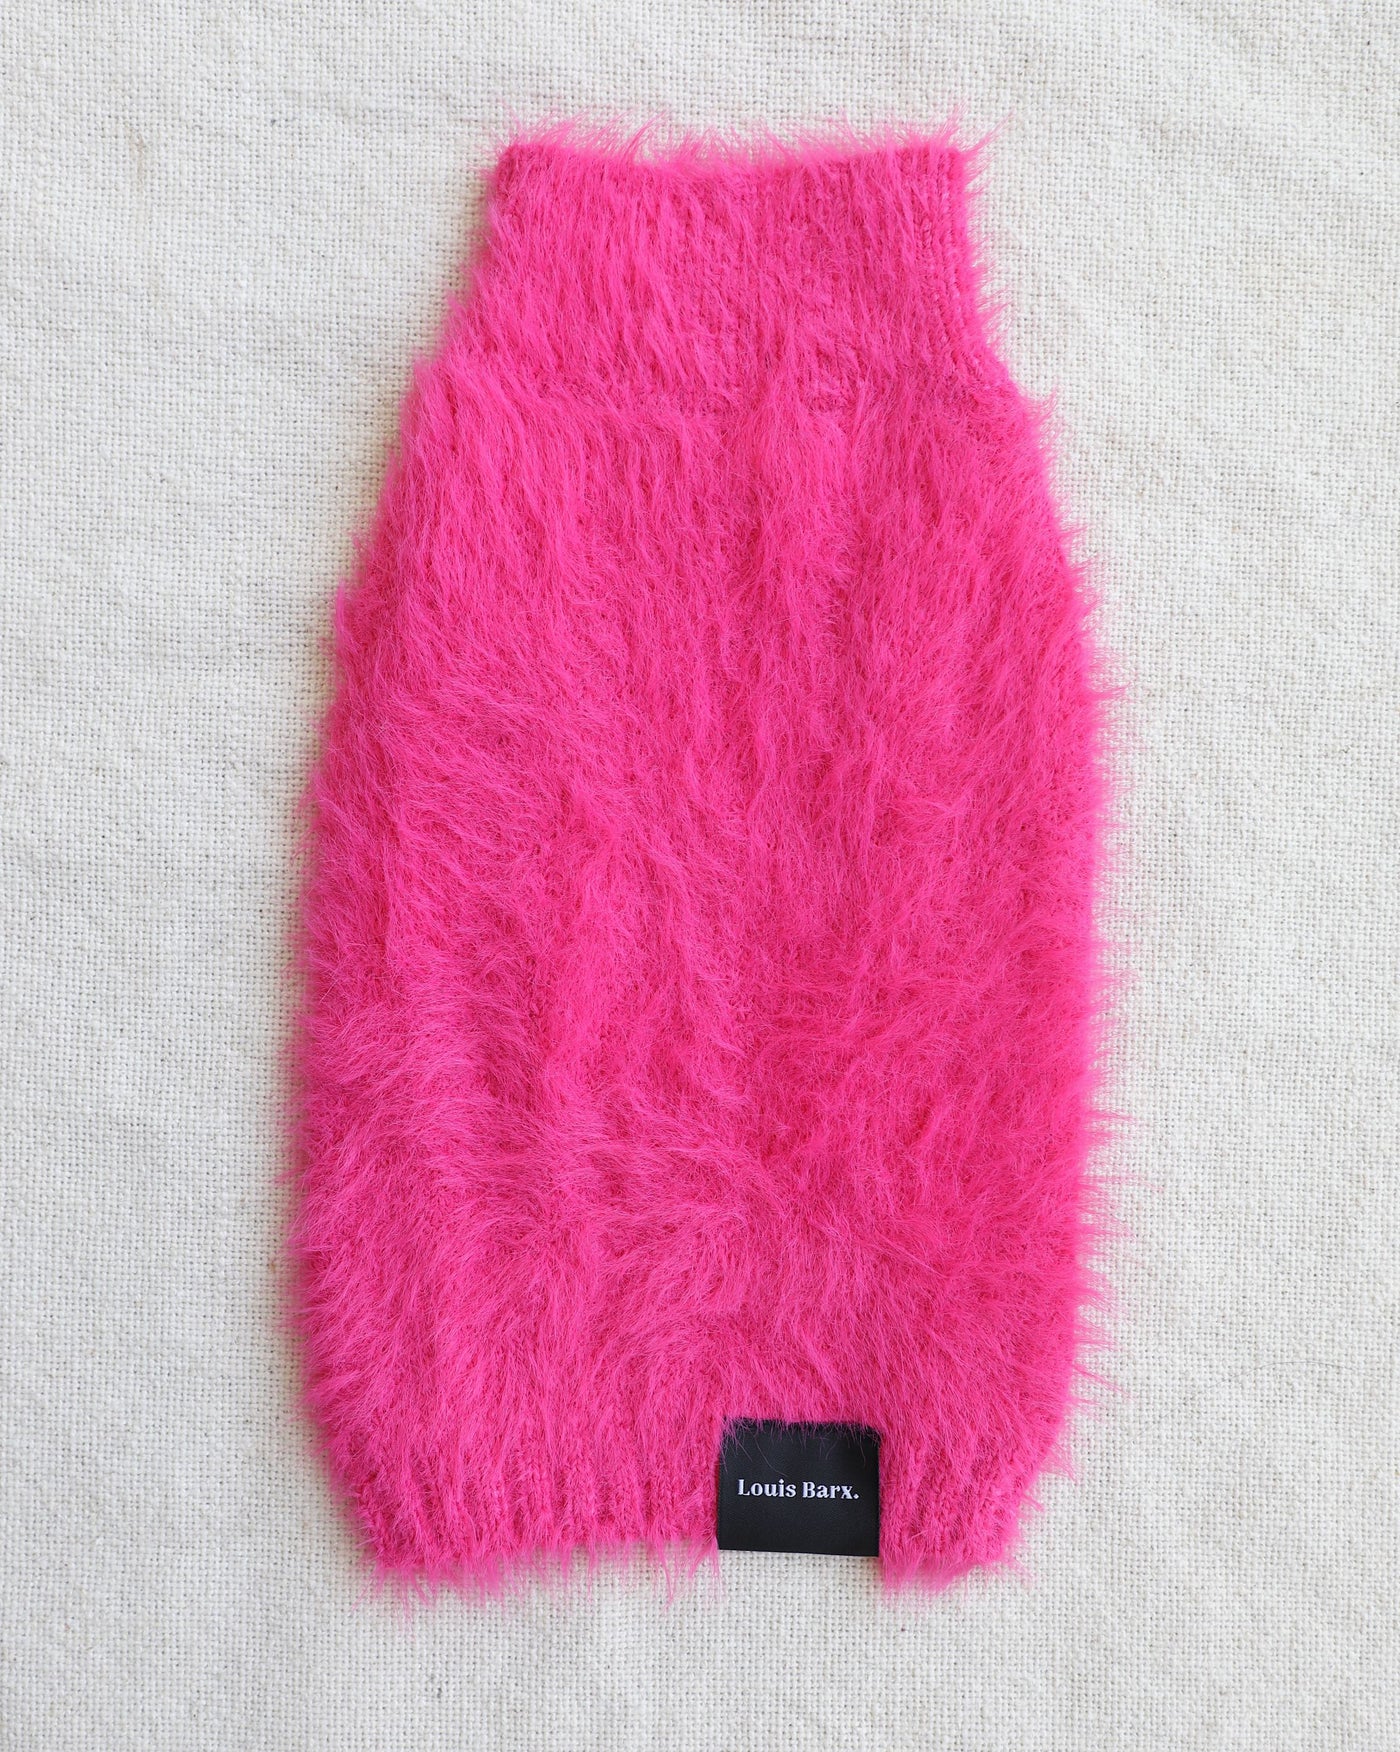 Fluffy hot pink dog sweater on white background